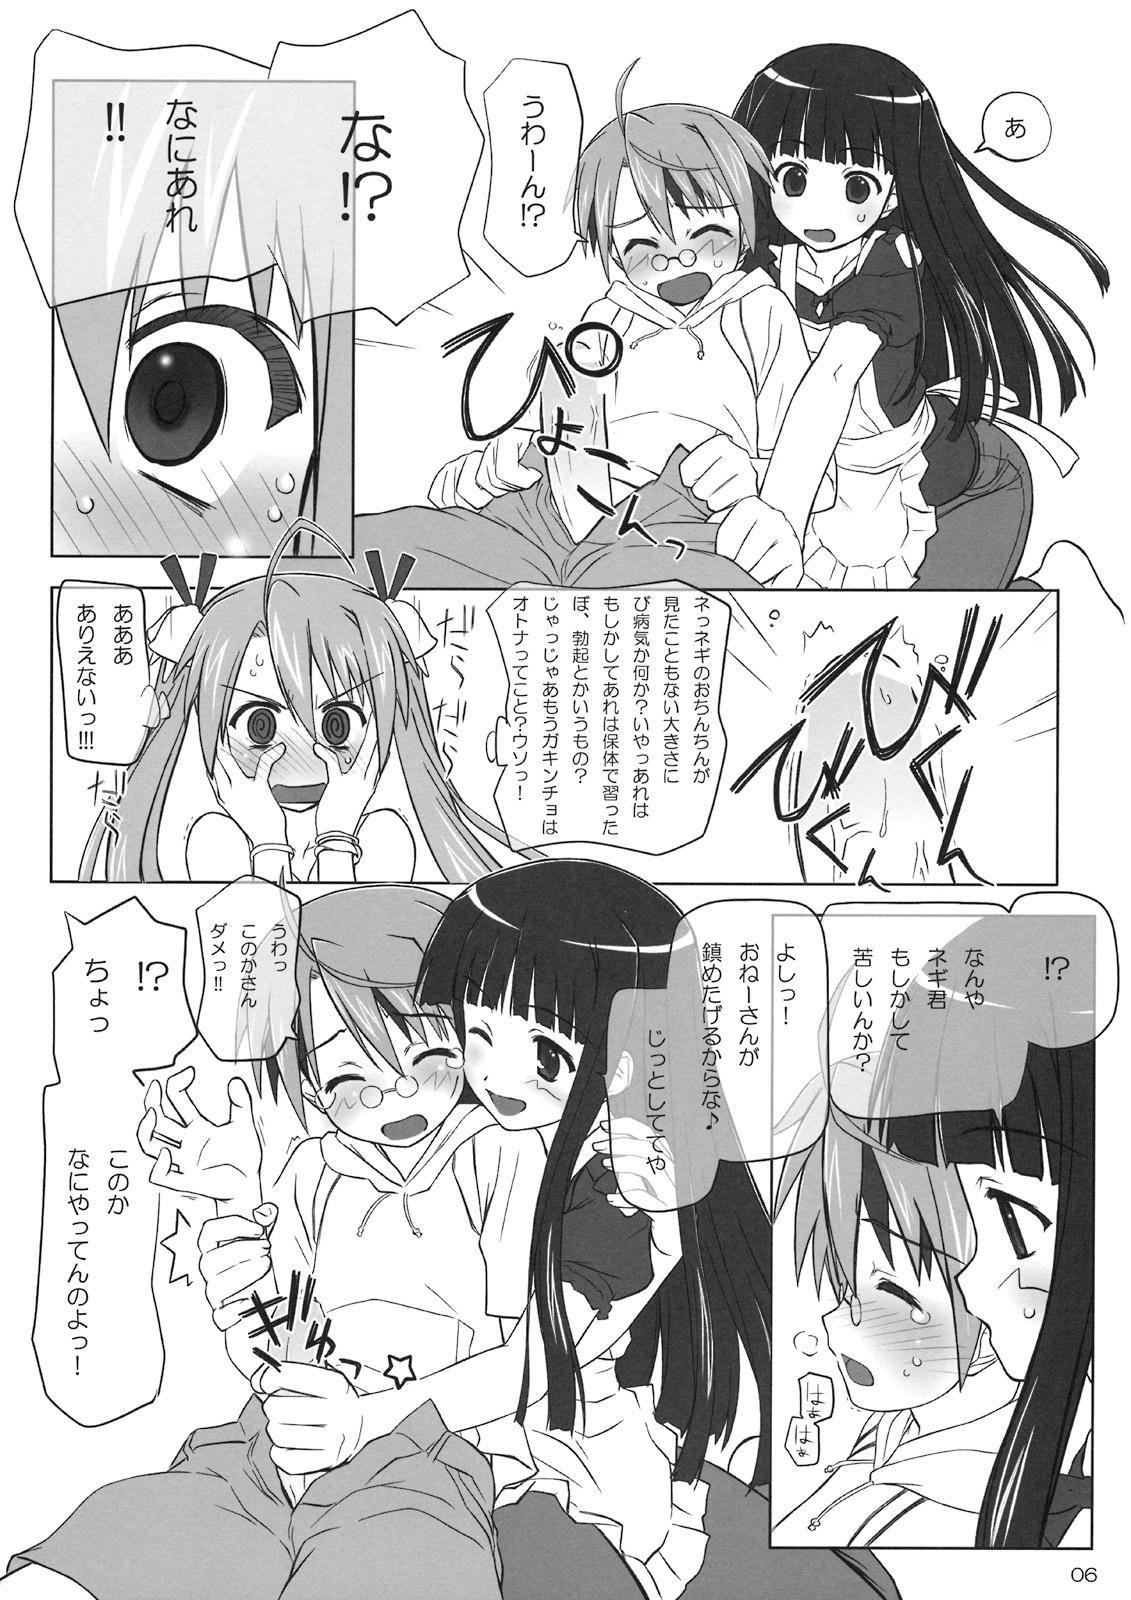  Dear My Little Witches 2nd - Mahou sensei negima Indian - Page 5